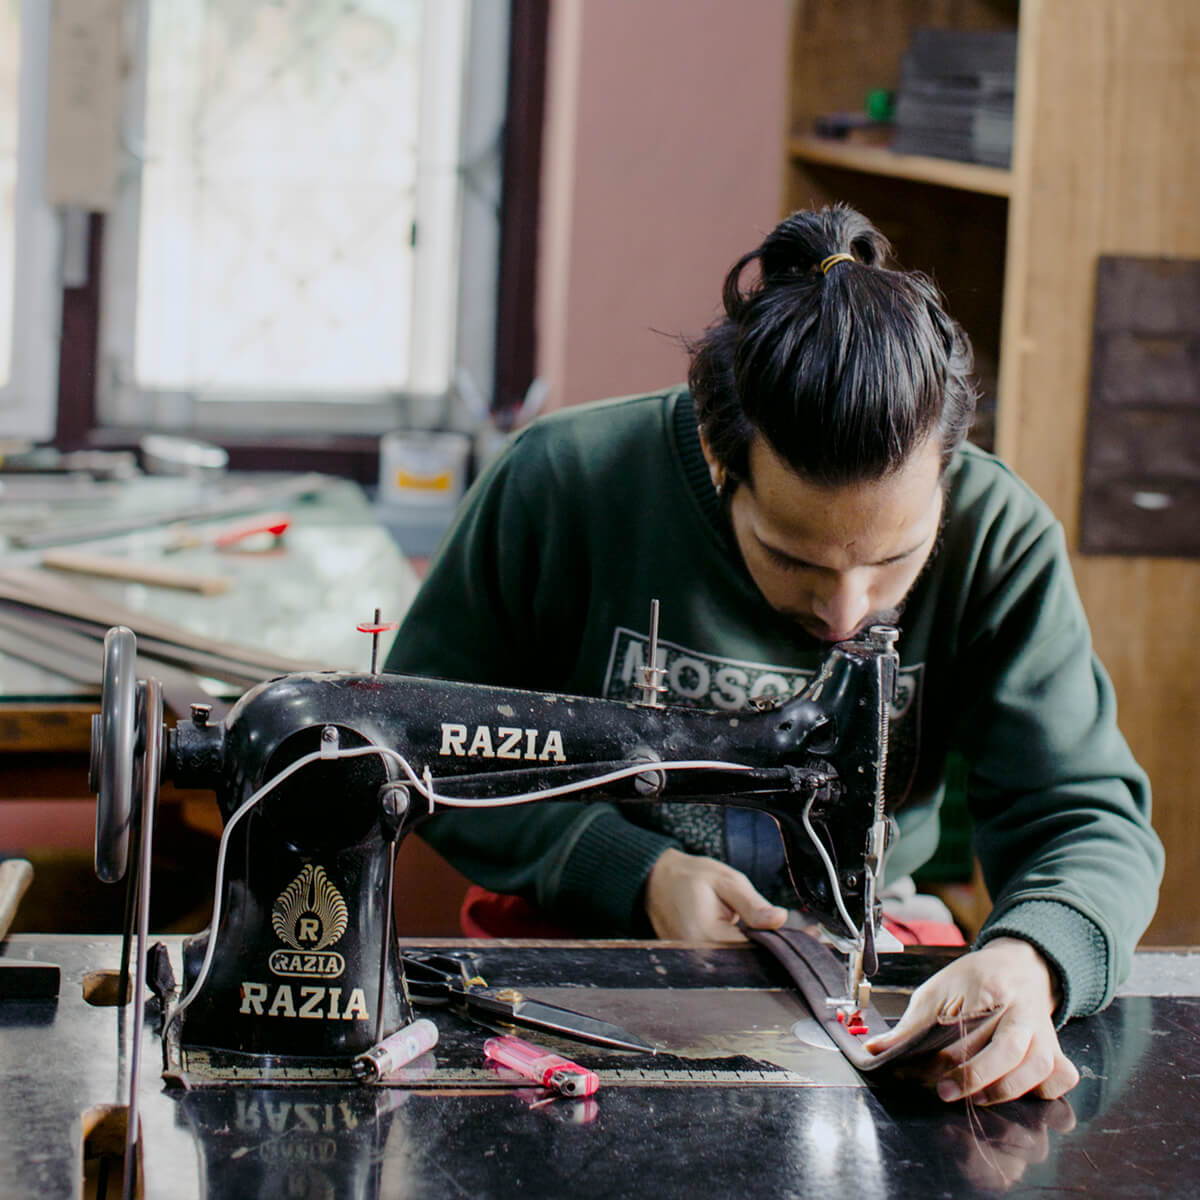 Unique handcrafted handbags made ethically by master artisans in Nepal